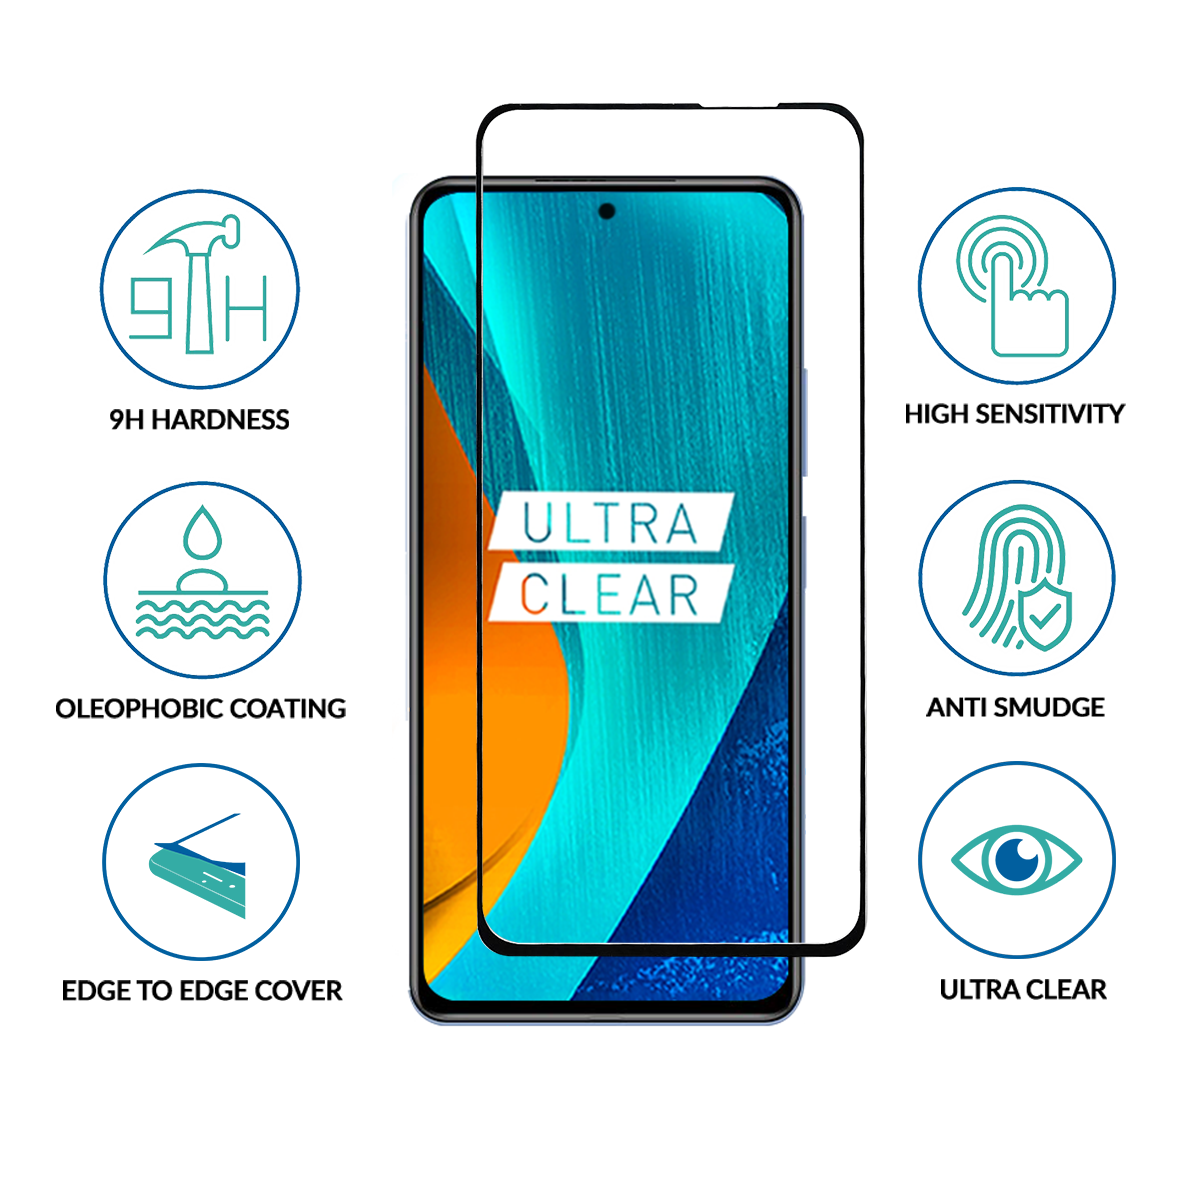 sprig full cover tempered glass screen protector for redmi note 10 pro